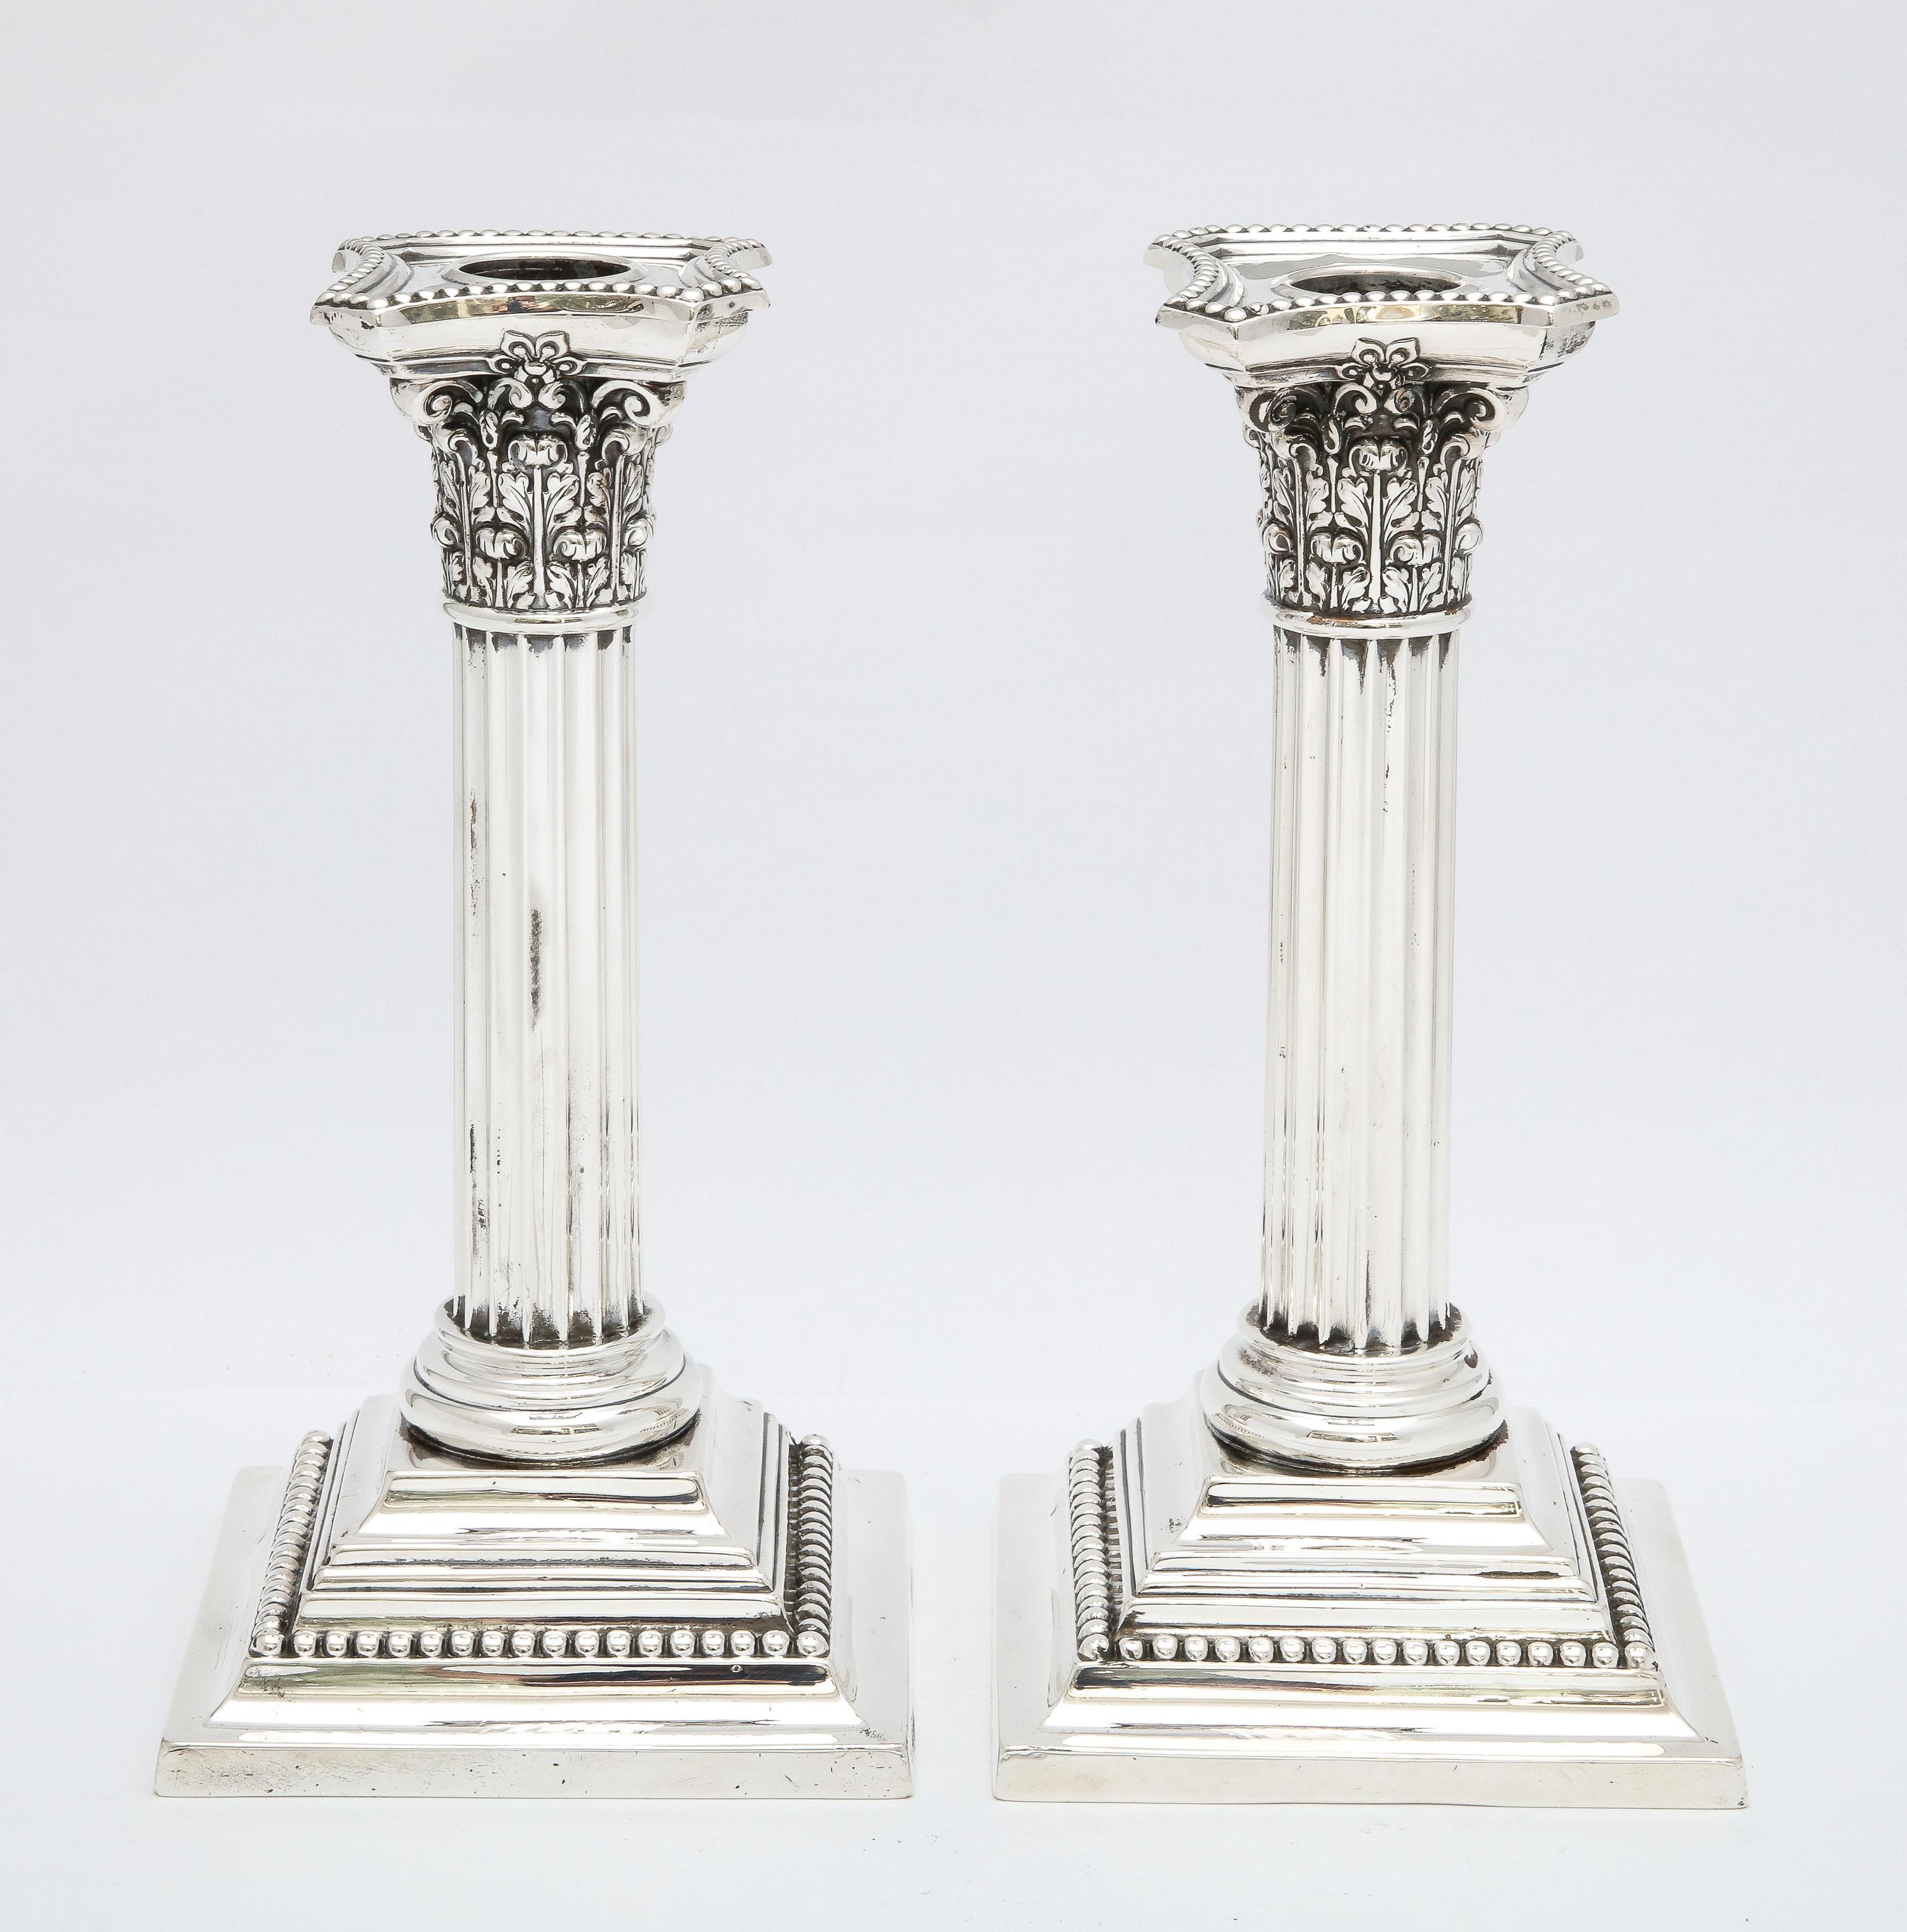 Pair of Edwardian Period, sterling silver, neoclassical-Style Corinthian Column candlesticks, Gorham Manufacturing Corp., Providence, Rhode Island, year-hallmarked for 1906. Each candlestick measures 8 1/4 inches high x 4 1/4 inches wide (at widest